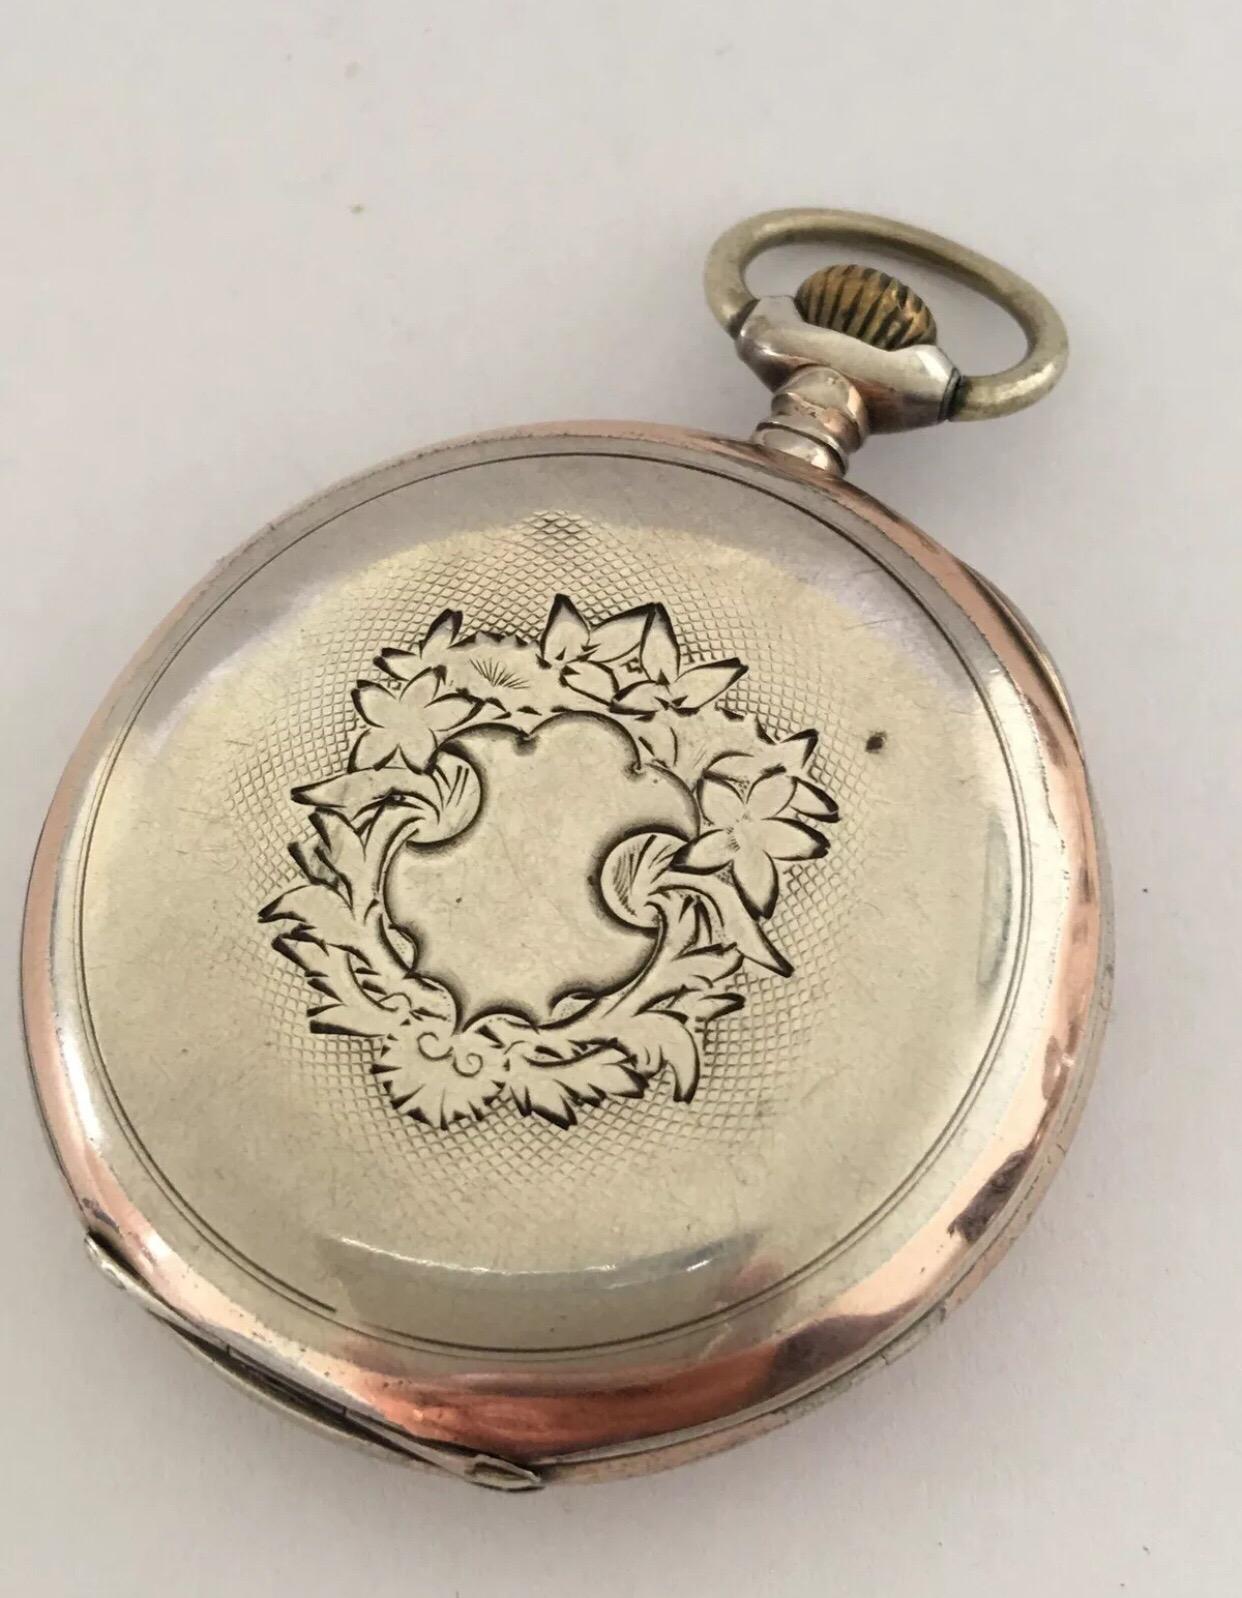 Antique Silver Omega Pocket Watch.

This watch is working and running well. Visible cracks and chipped on the dial as shown on the photo. Watch case a bit tarnished.